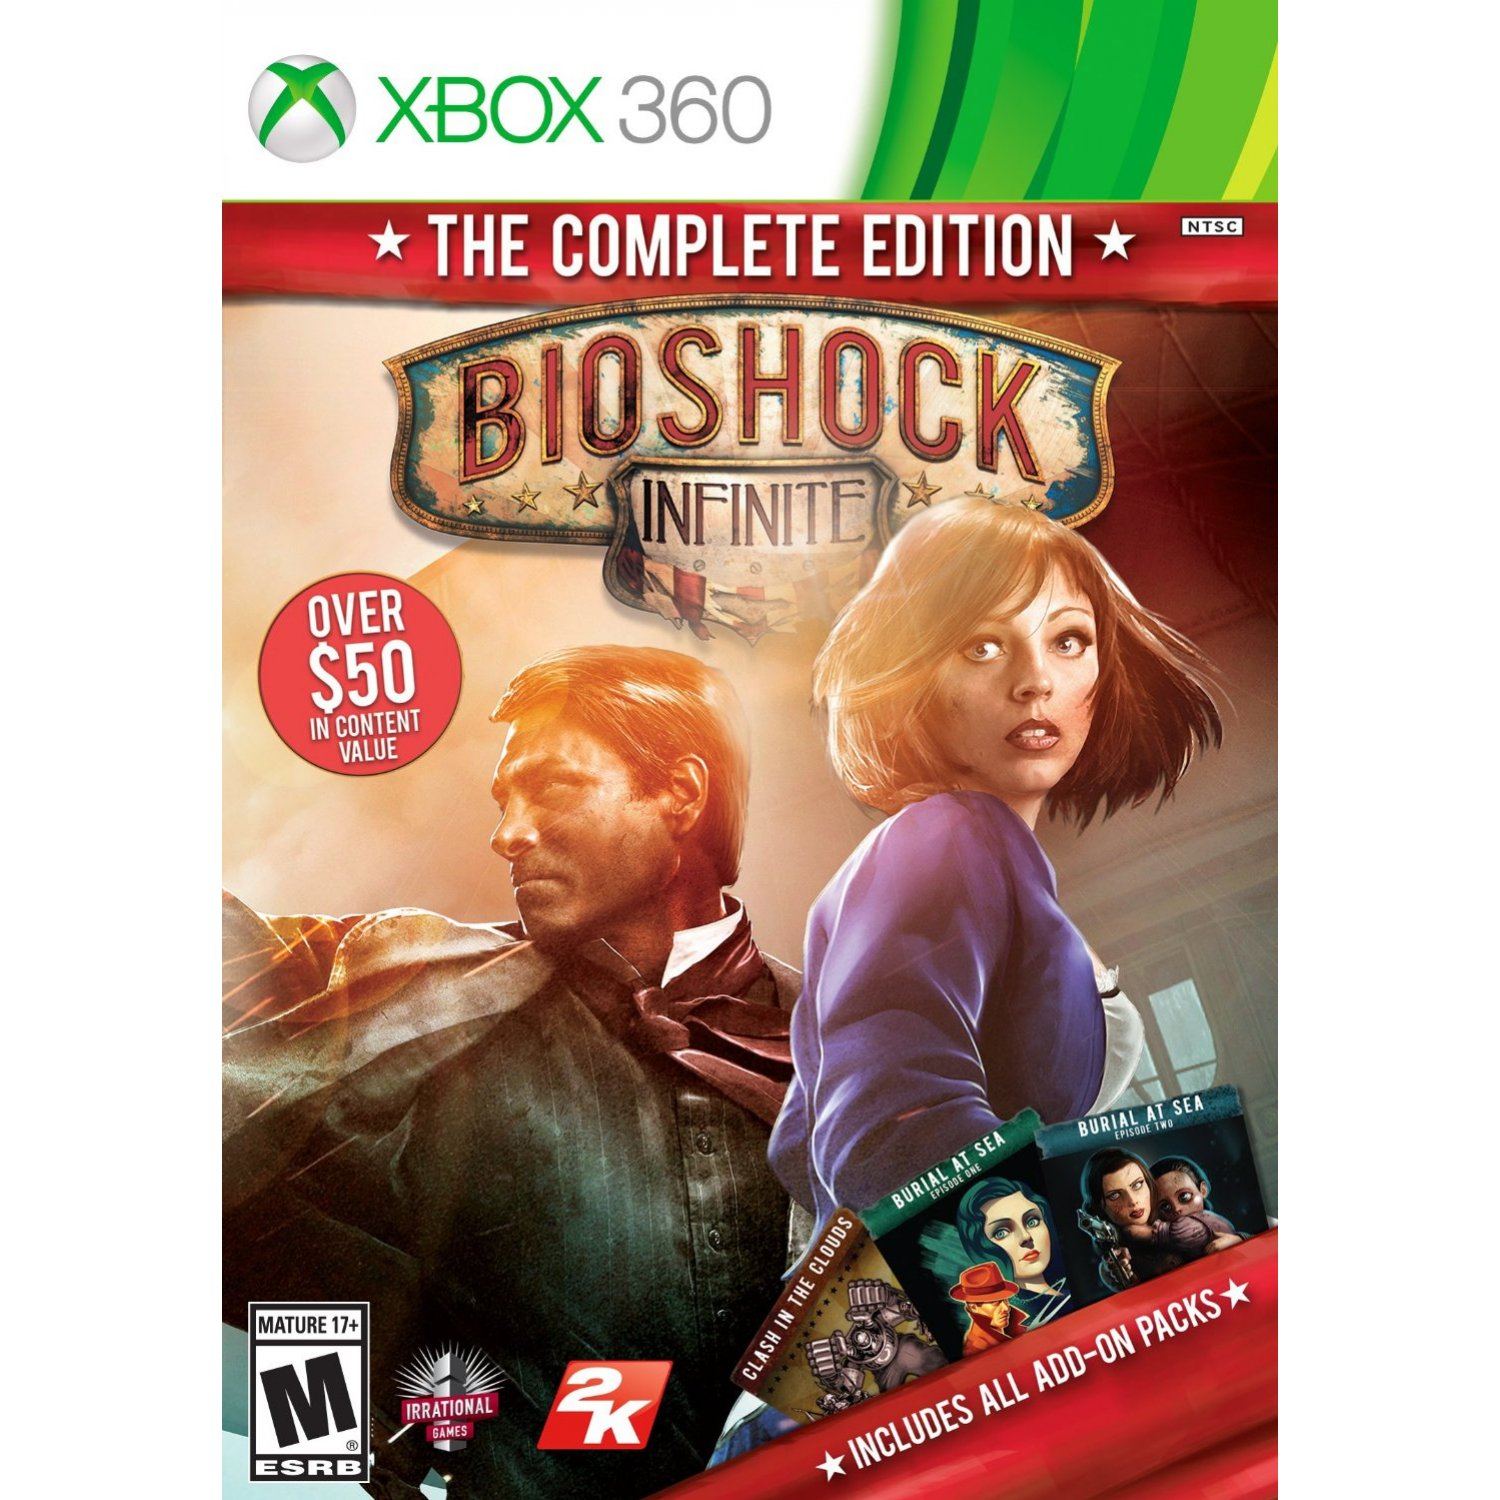 BioShock: The Collection gameplay footage and Xbox 360/PS4